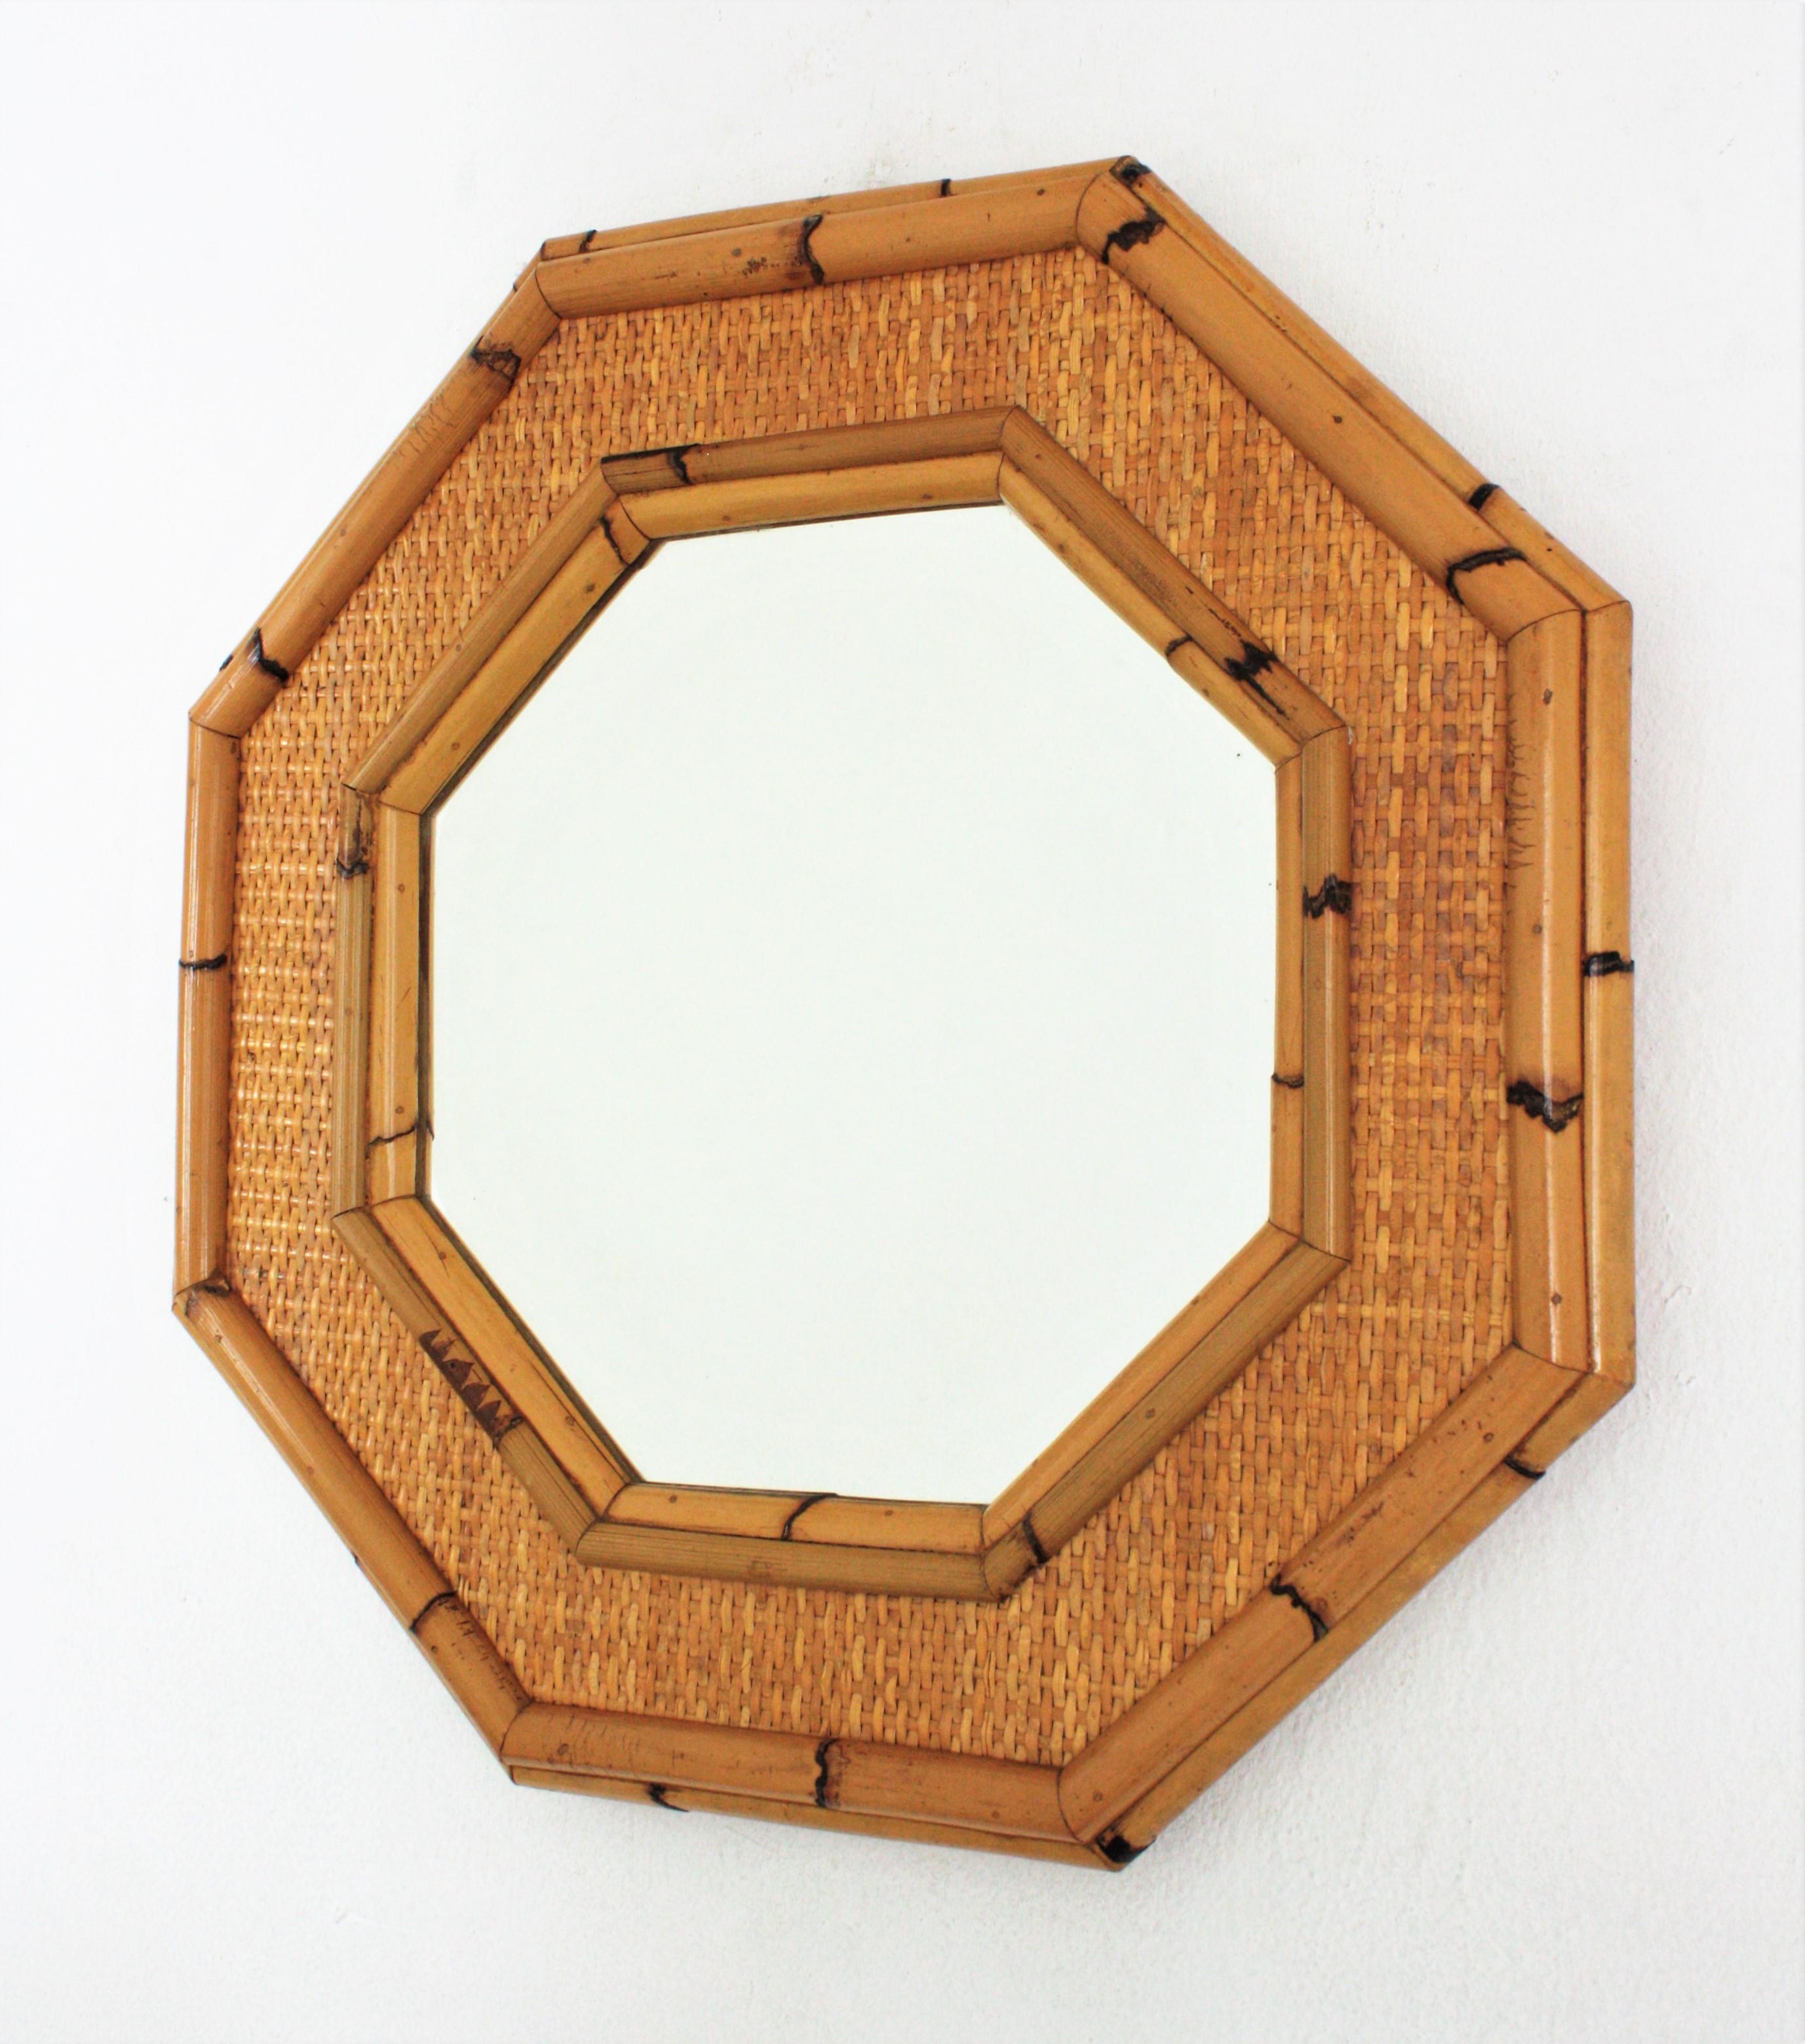 Hand-Crafted Octagonal Wall Mirror in Bamboo and Woven Rattan, 1970s For Sale